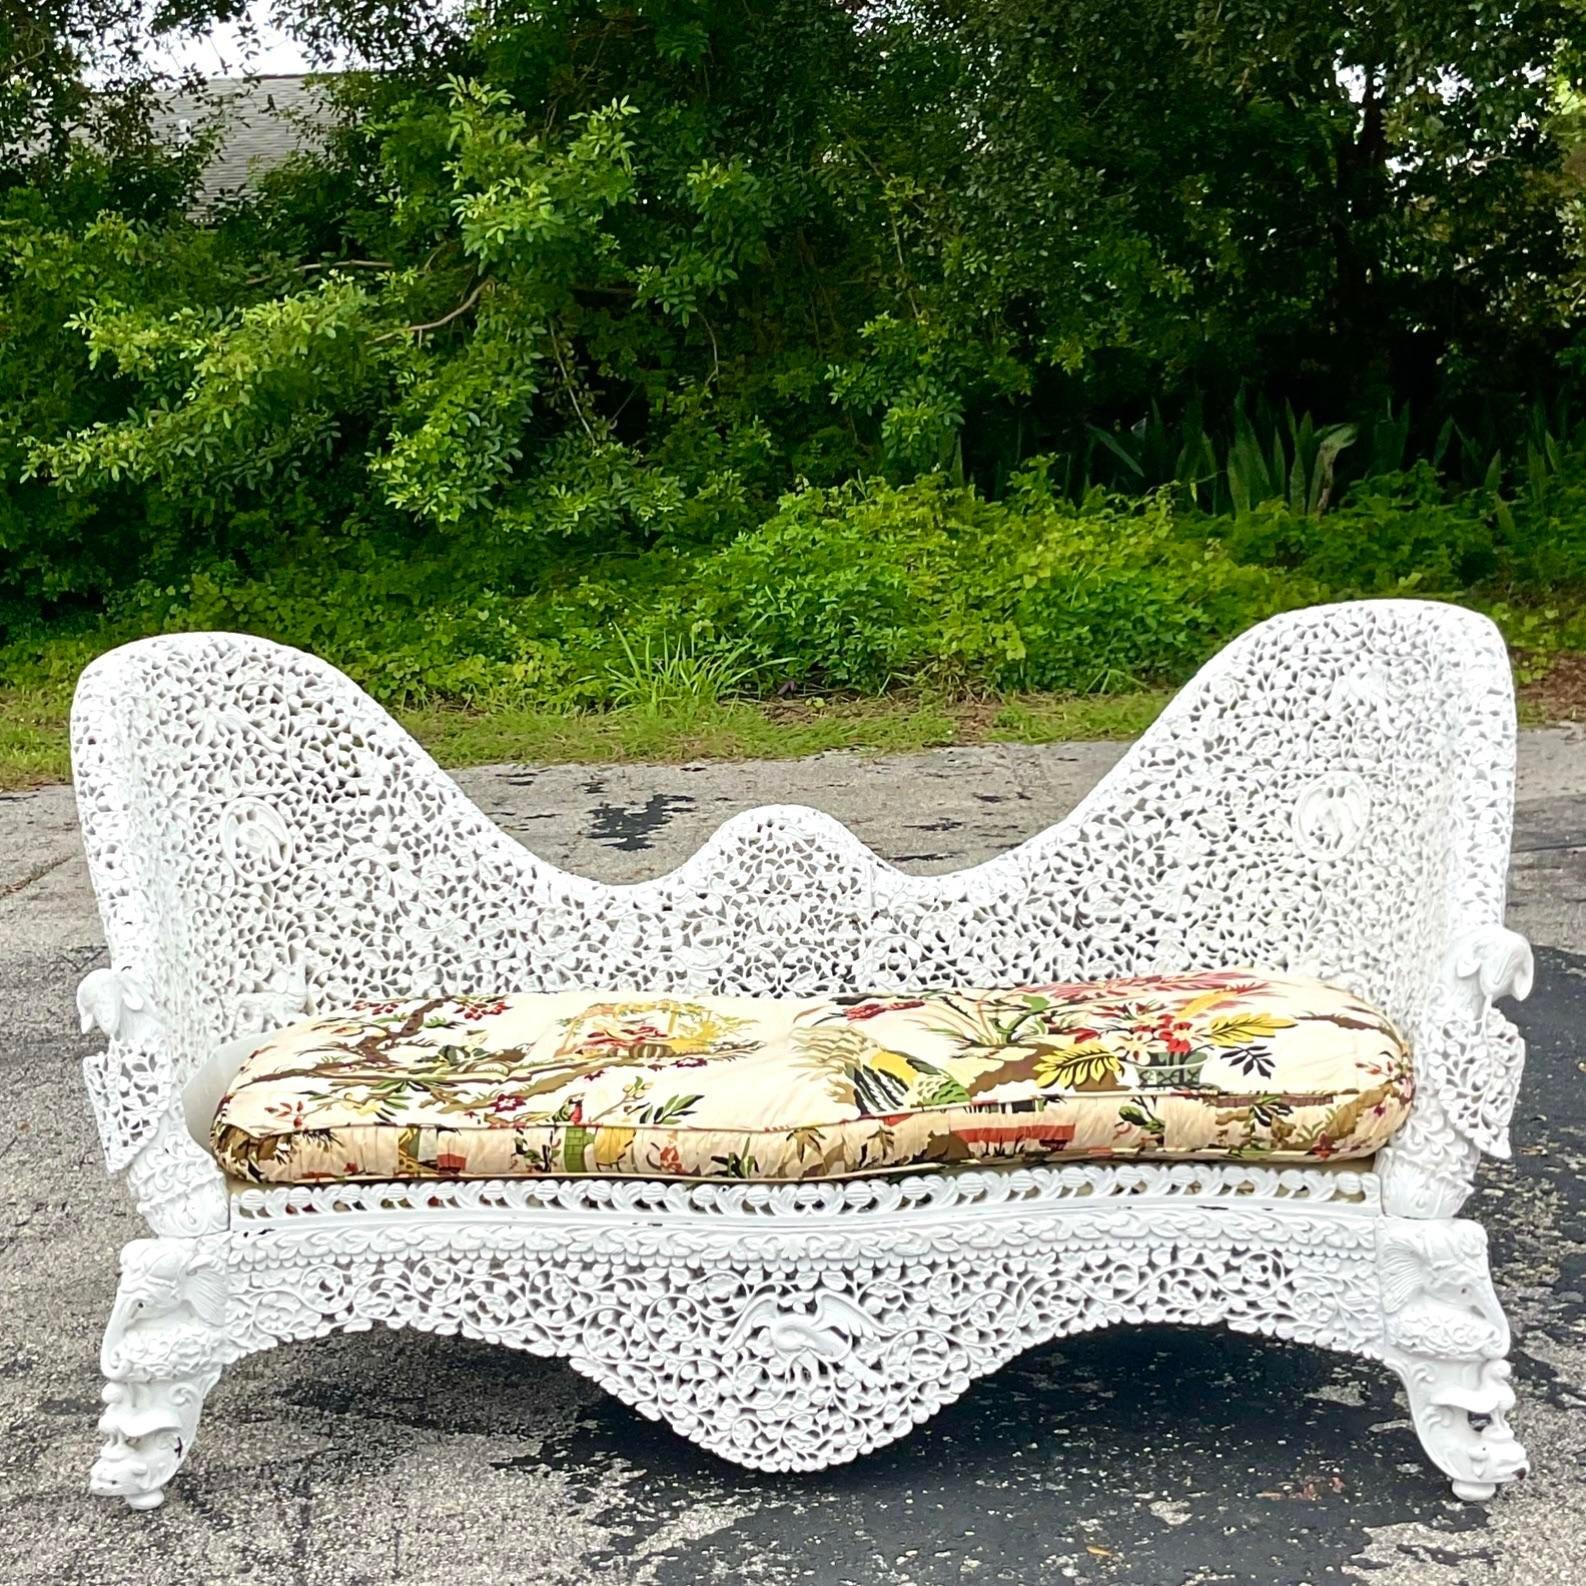 An extraordinary vintage Boho wood sofa. A hand carved Burmese gem with the more intricate carved detail. A sweeping high back in a gloss white finish. A fabulous Chinoiserie printed cushion. Acquired from a beautiful Palm Beach estate.